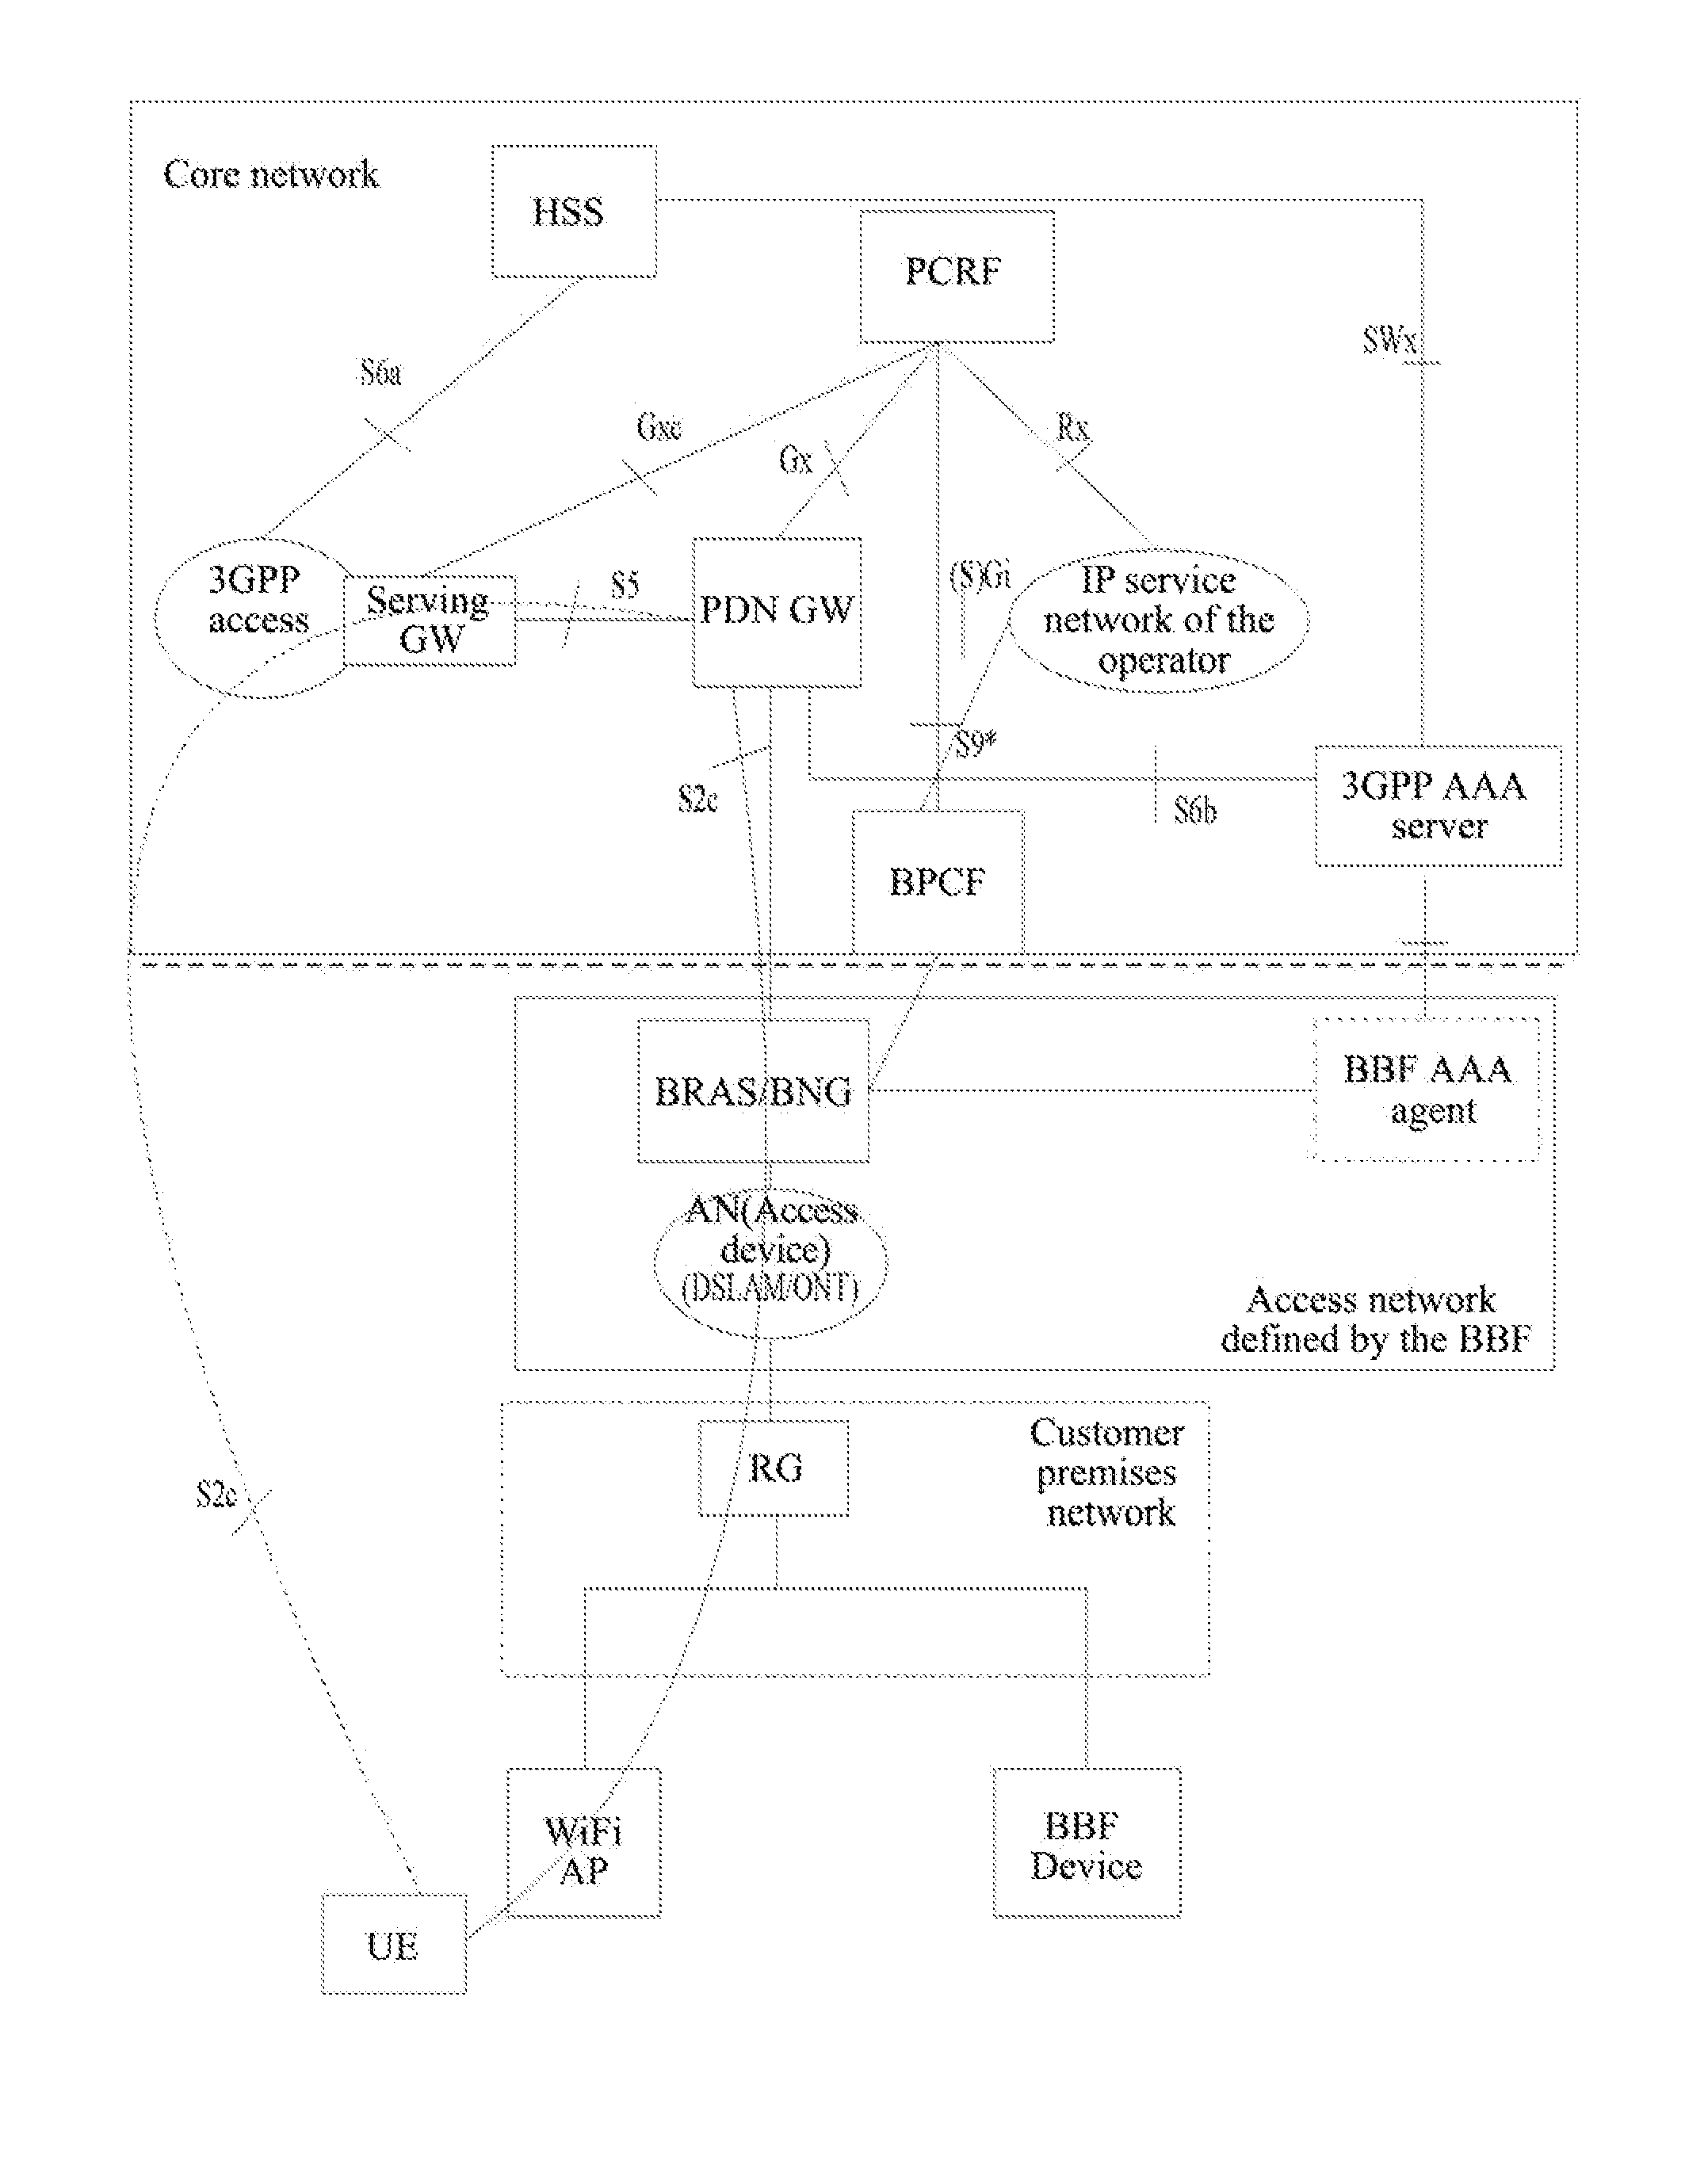 Method for Policy and Charging Rules Function (PCRF) Informing Centralized Deployment Functional Architecture (BPCF) of User Equipment Access Information